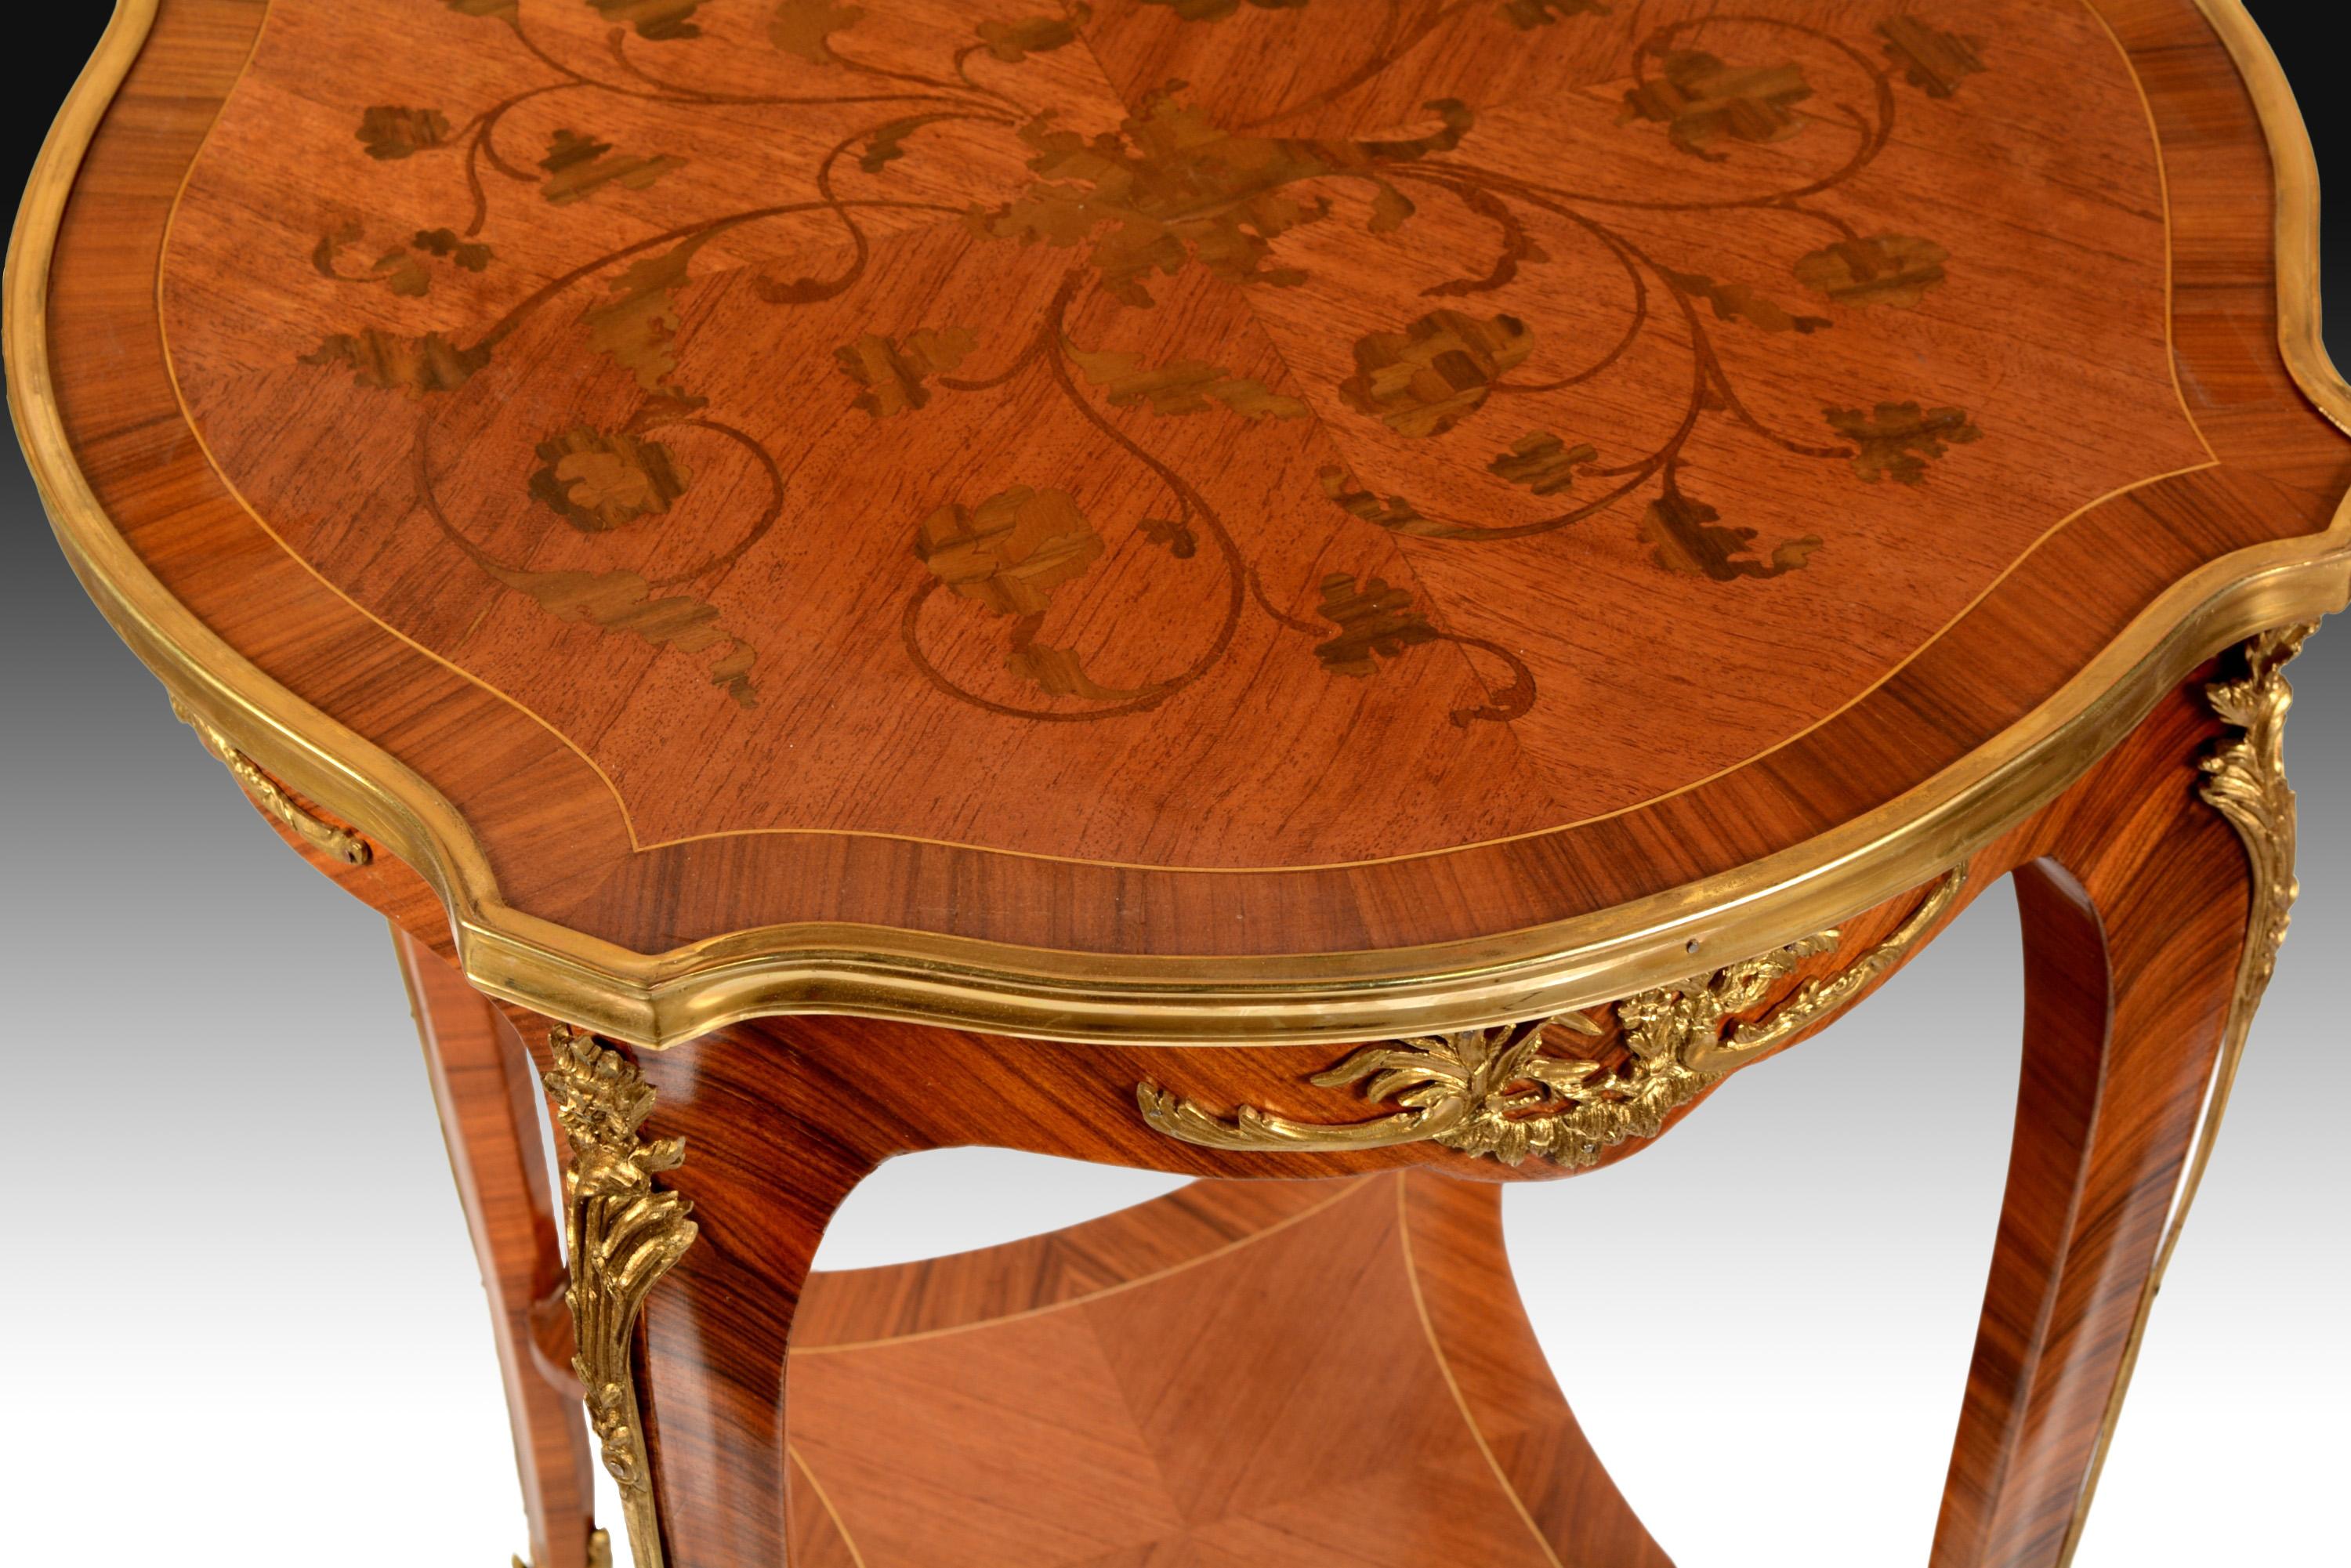 The four cabriolet legs have been joined in their inferior part with a square shelf of concave edges and they have been decorated with vegetal elements in golden bronze, like the waist of the table. The top panel, round with straight extensions,